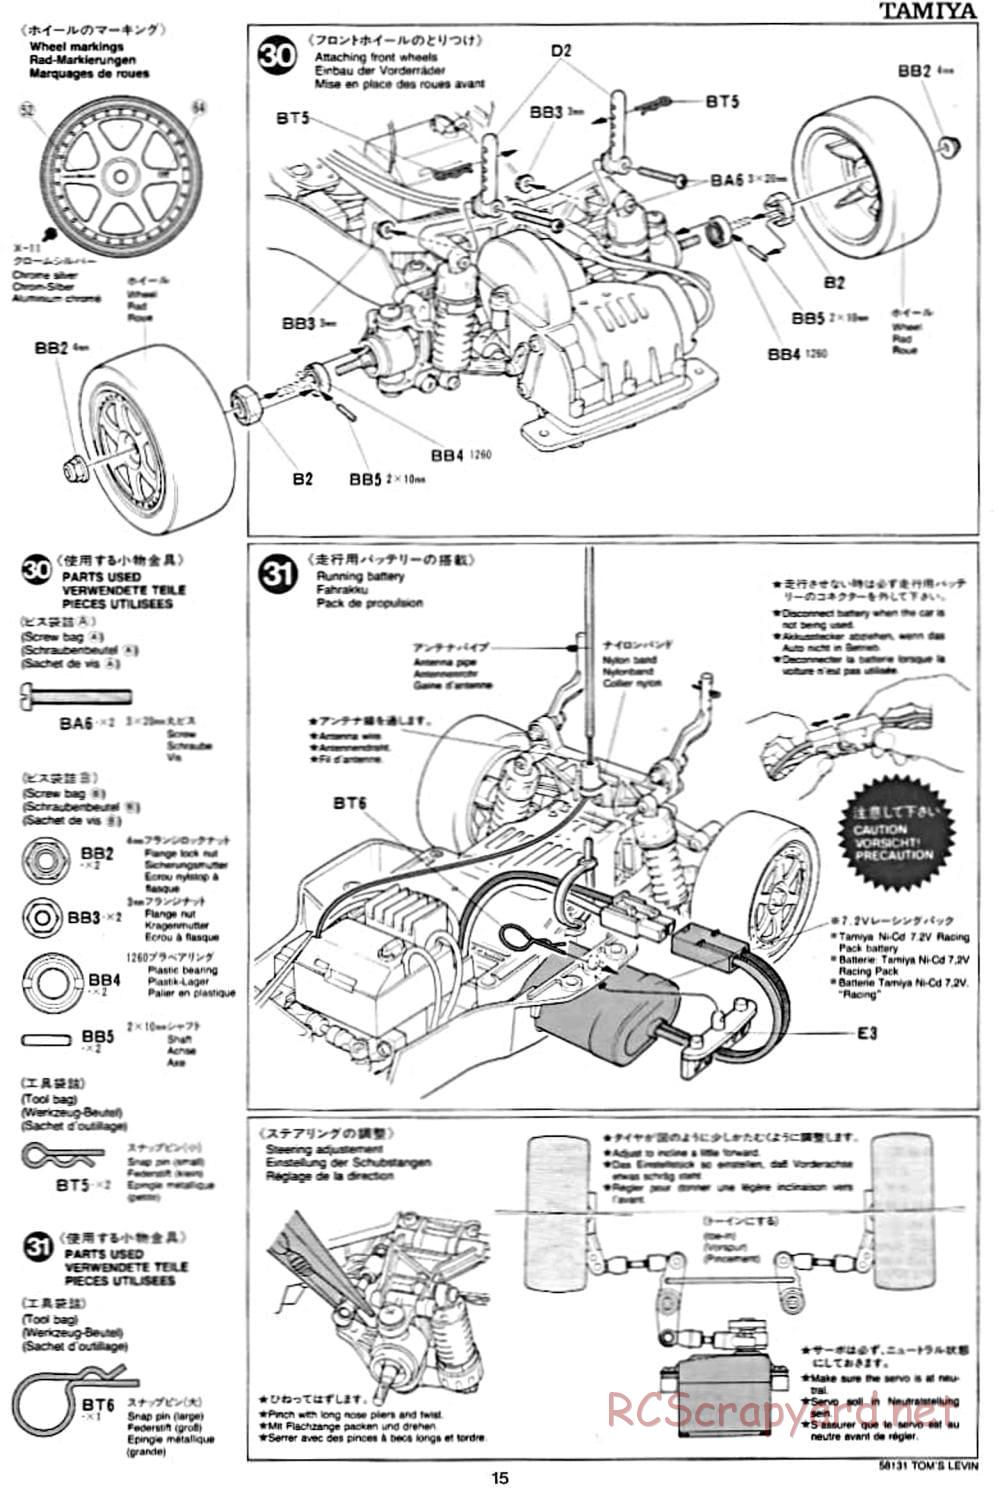 Tamiya - Toyota Tom's Levin - FF-01 Chassis - Manual - Page 15